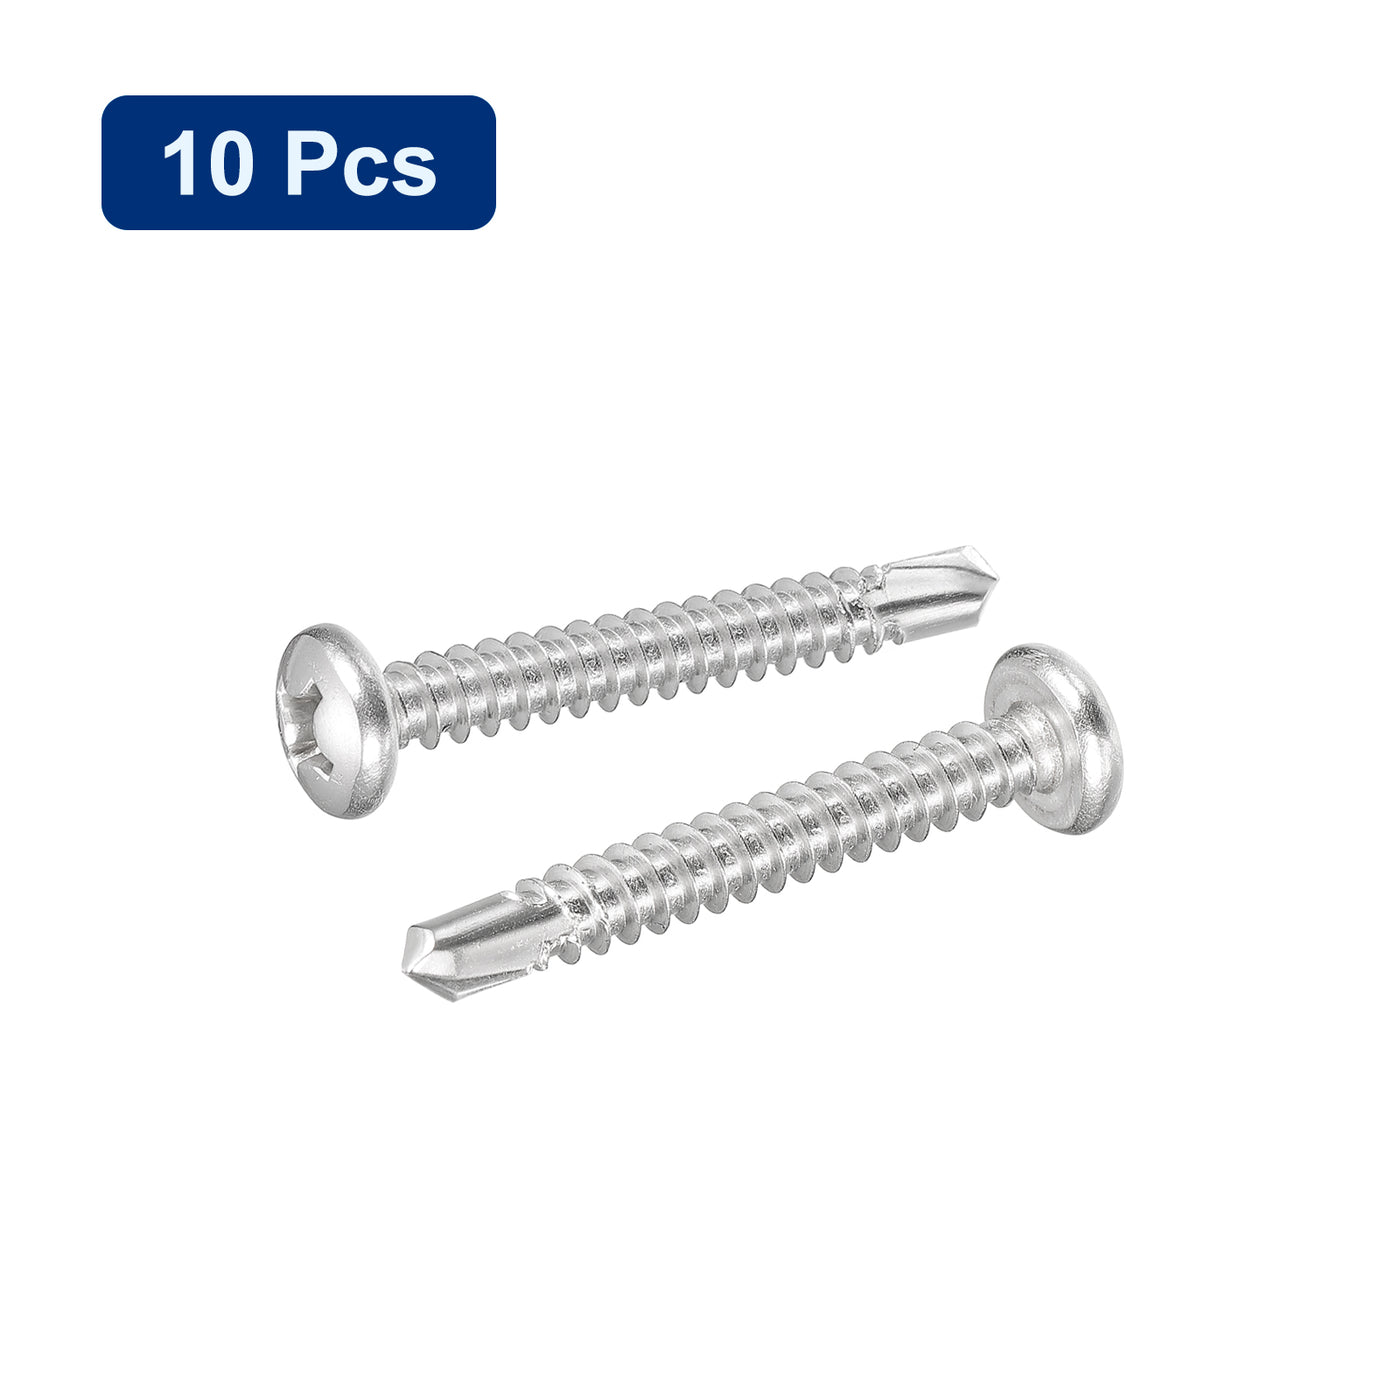 uxcell Uxcell #12 x 1-1/2" Self Drilling Screws, 10pcs Phillips Pan Head Self Tapping Screws